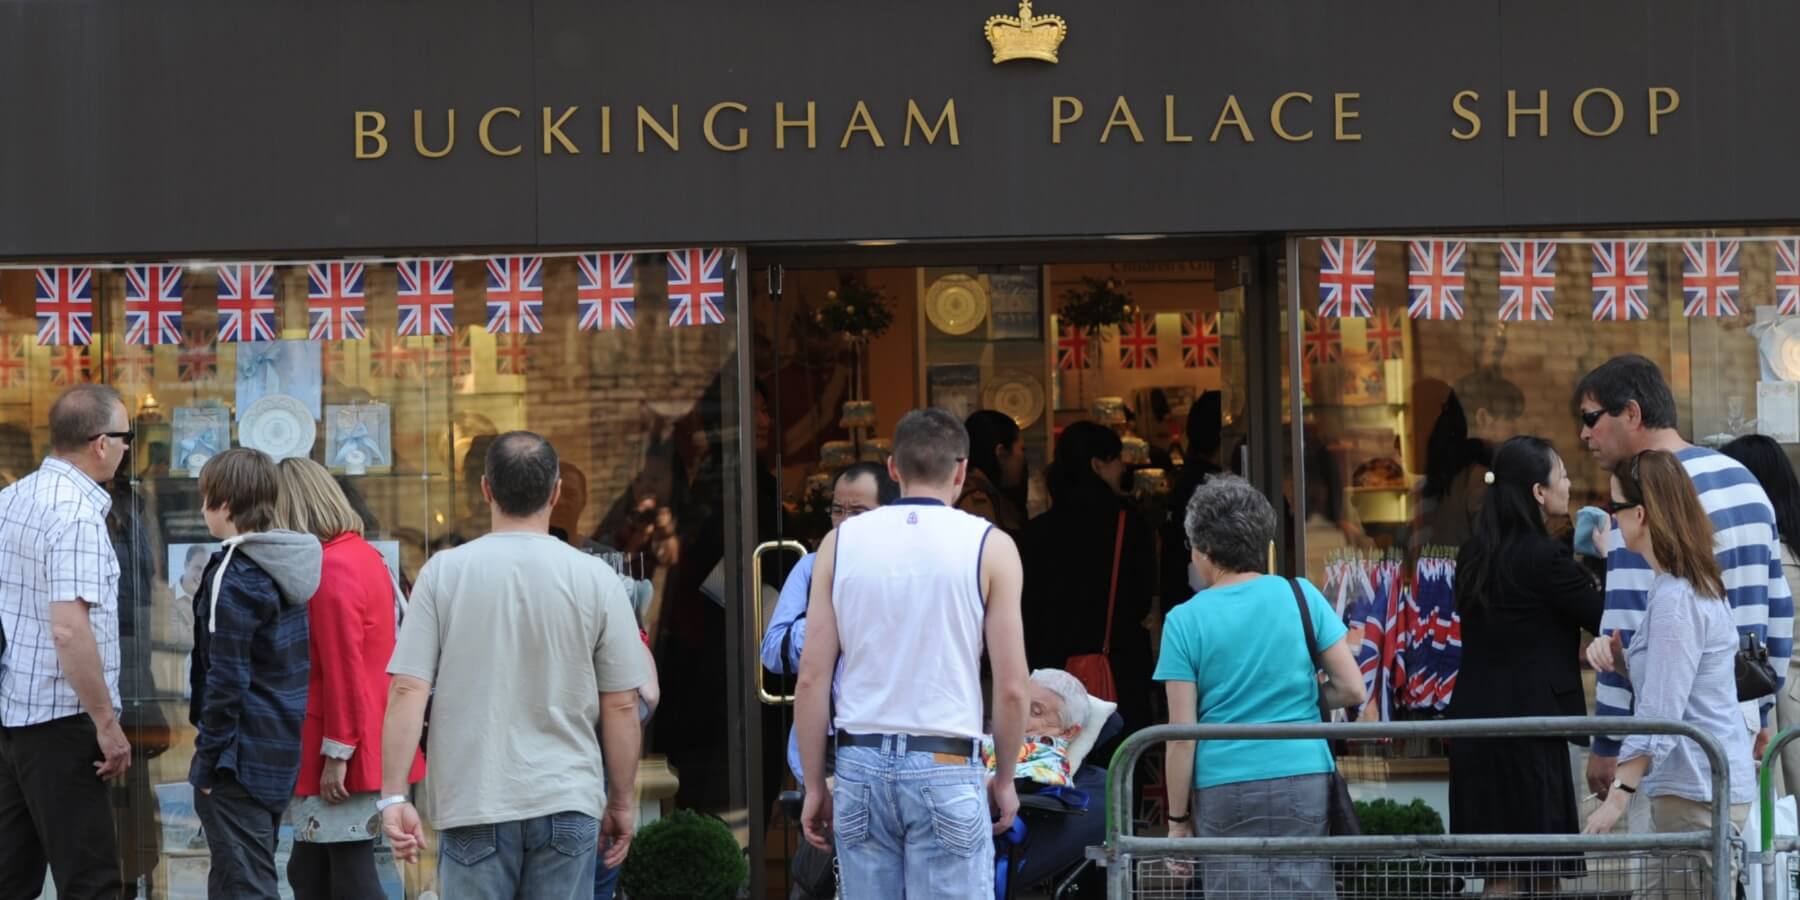 The Buckingham Palace shop is a London business not connected to Meghan Markle's products.